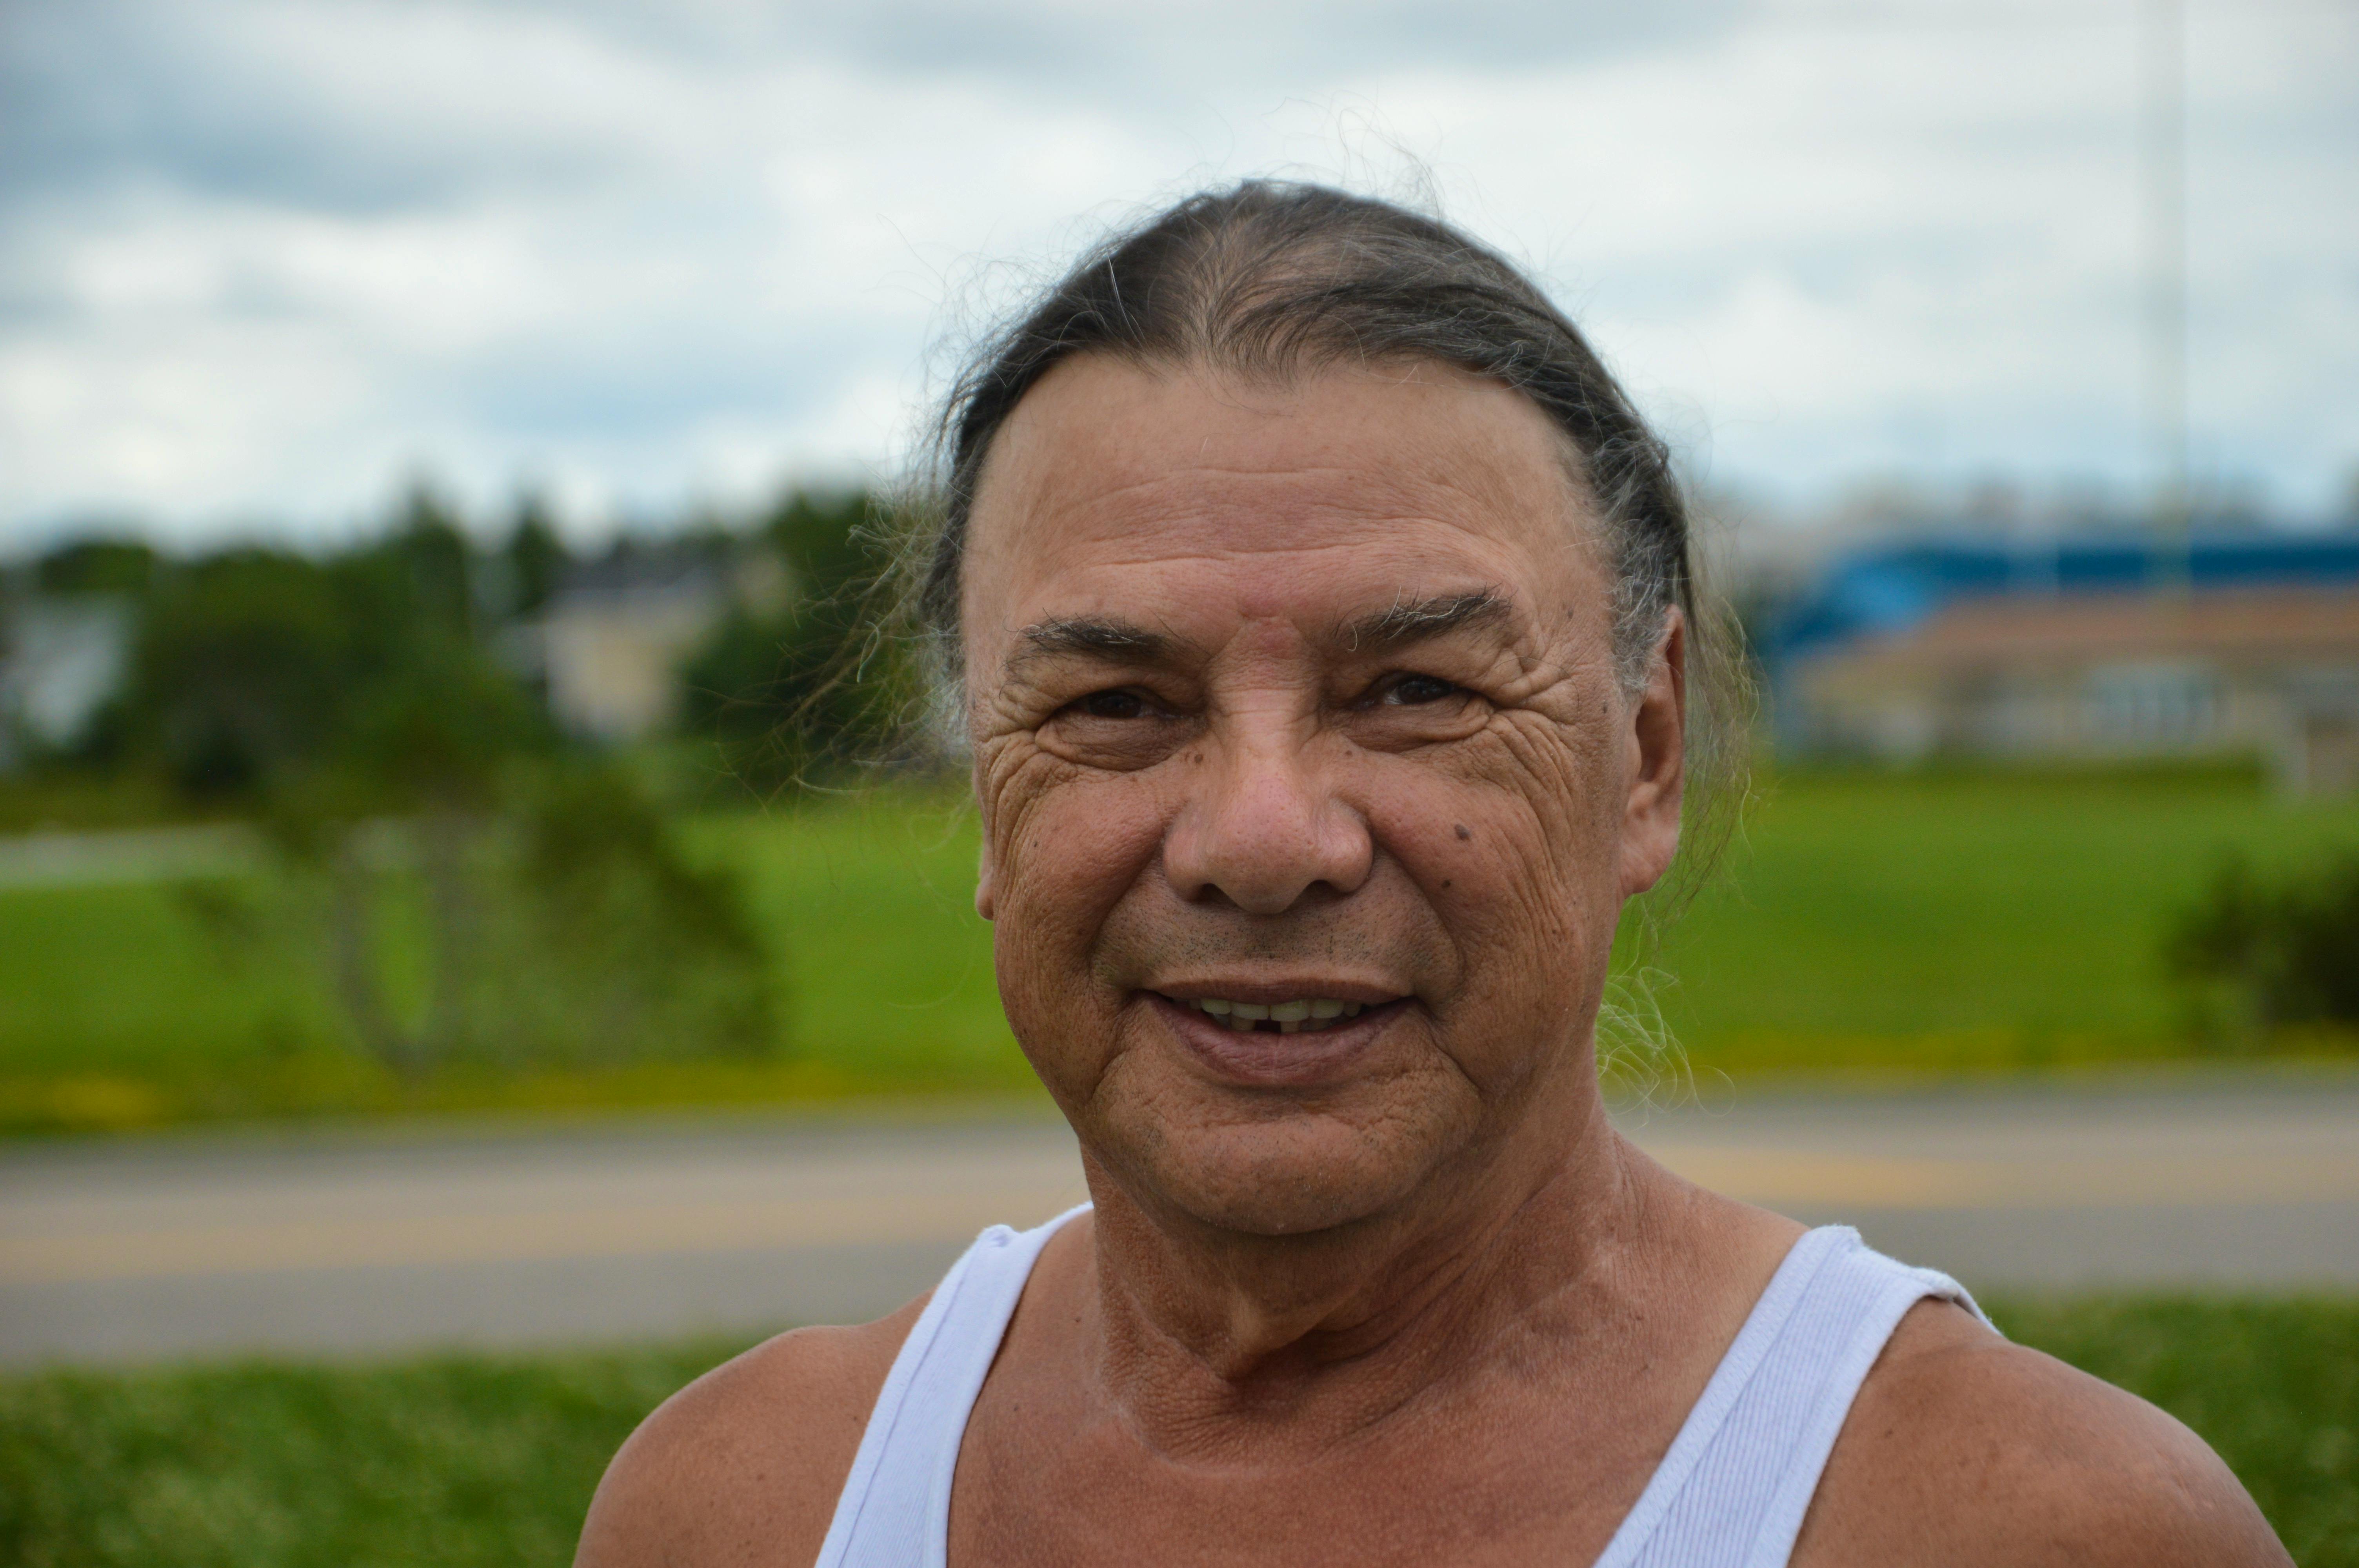 Daniel Joseph Paul is known as a young elder and a warrior in his home community of Membertou First Nation. The 61-year-old is still haunted by the decision to take his son Mise'l Paul off life support in 1997. The loss of his son led him down a dark path but was the turning point in his life. Once recovering from addictions he's walked a sober life since with the help of his great grandmothers spirit and his current wife. OSCAR BAKER III/CAPE BRETON POST